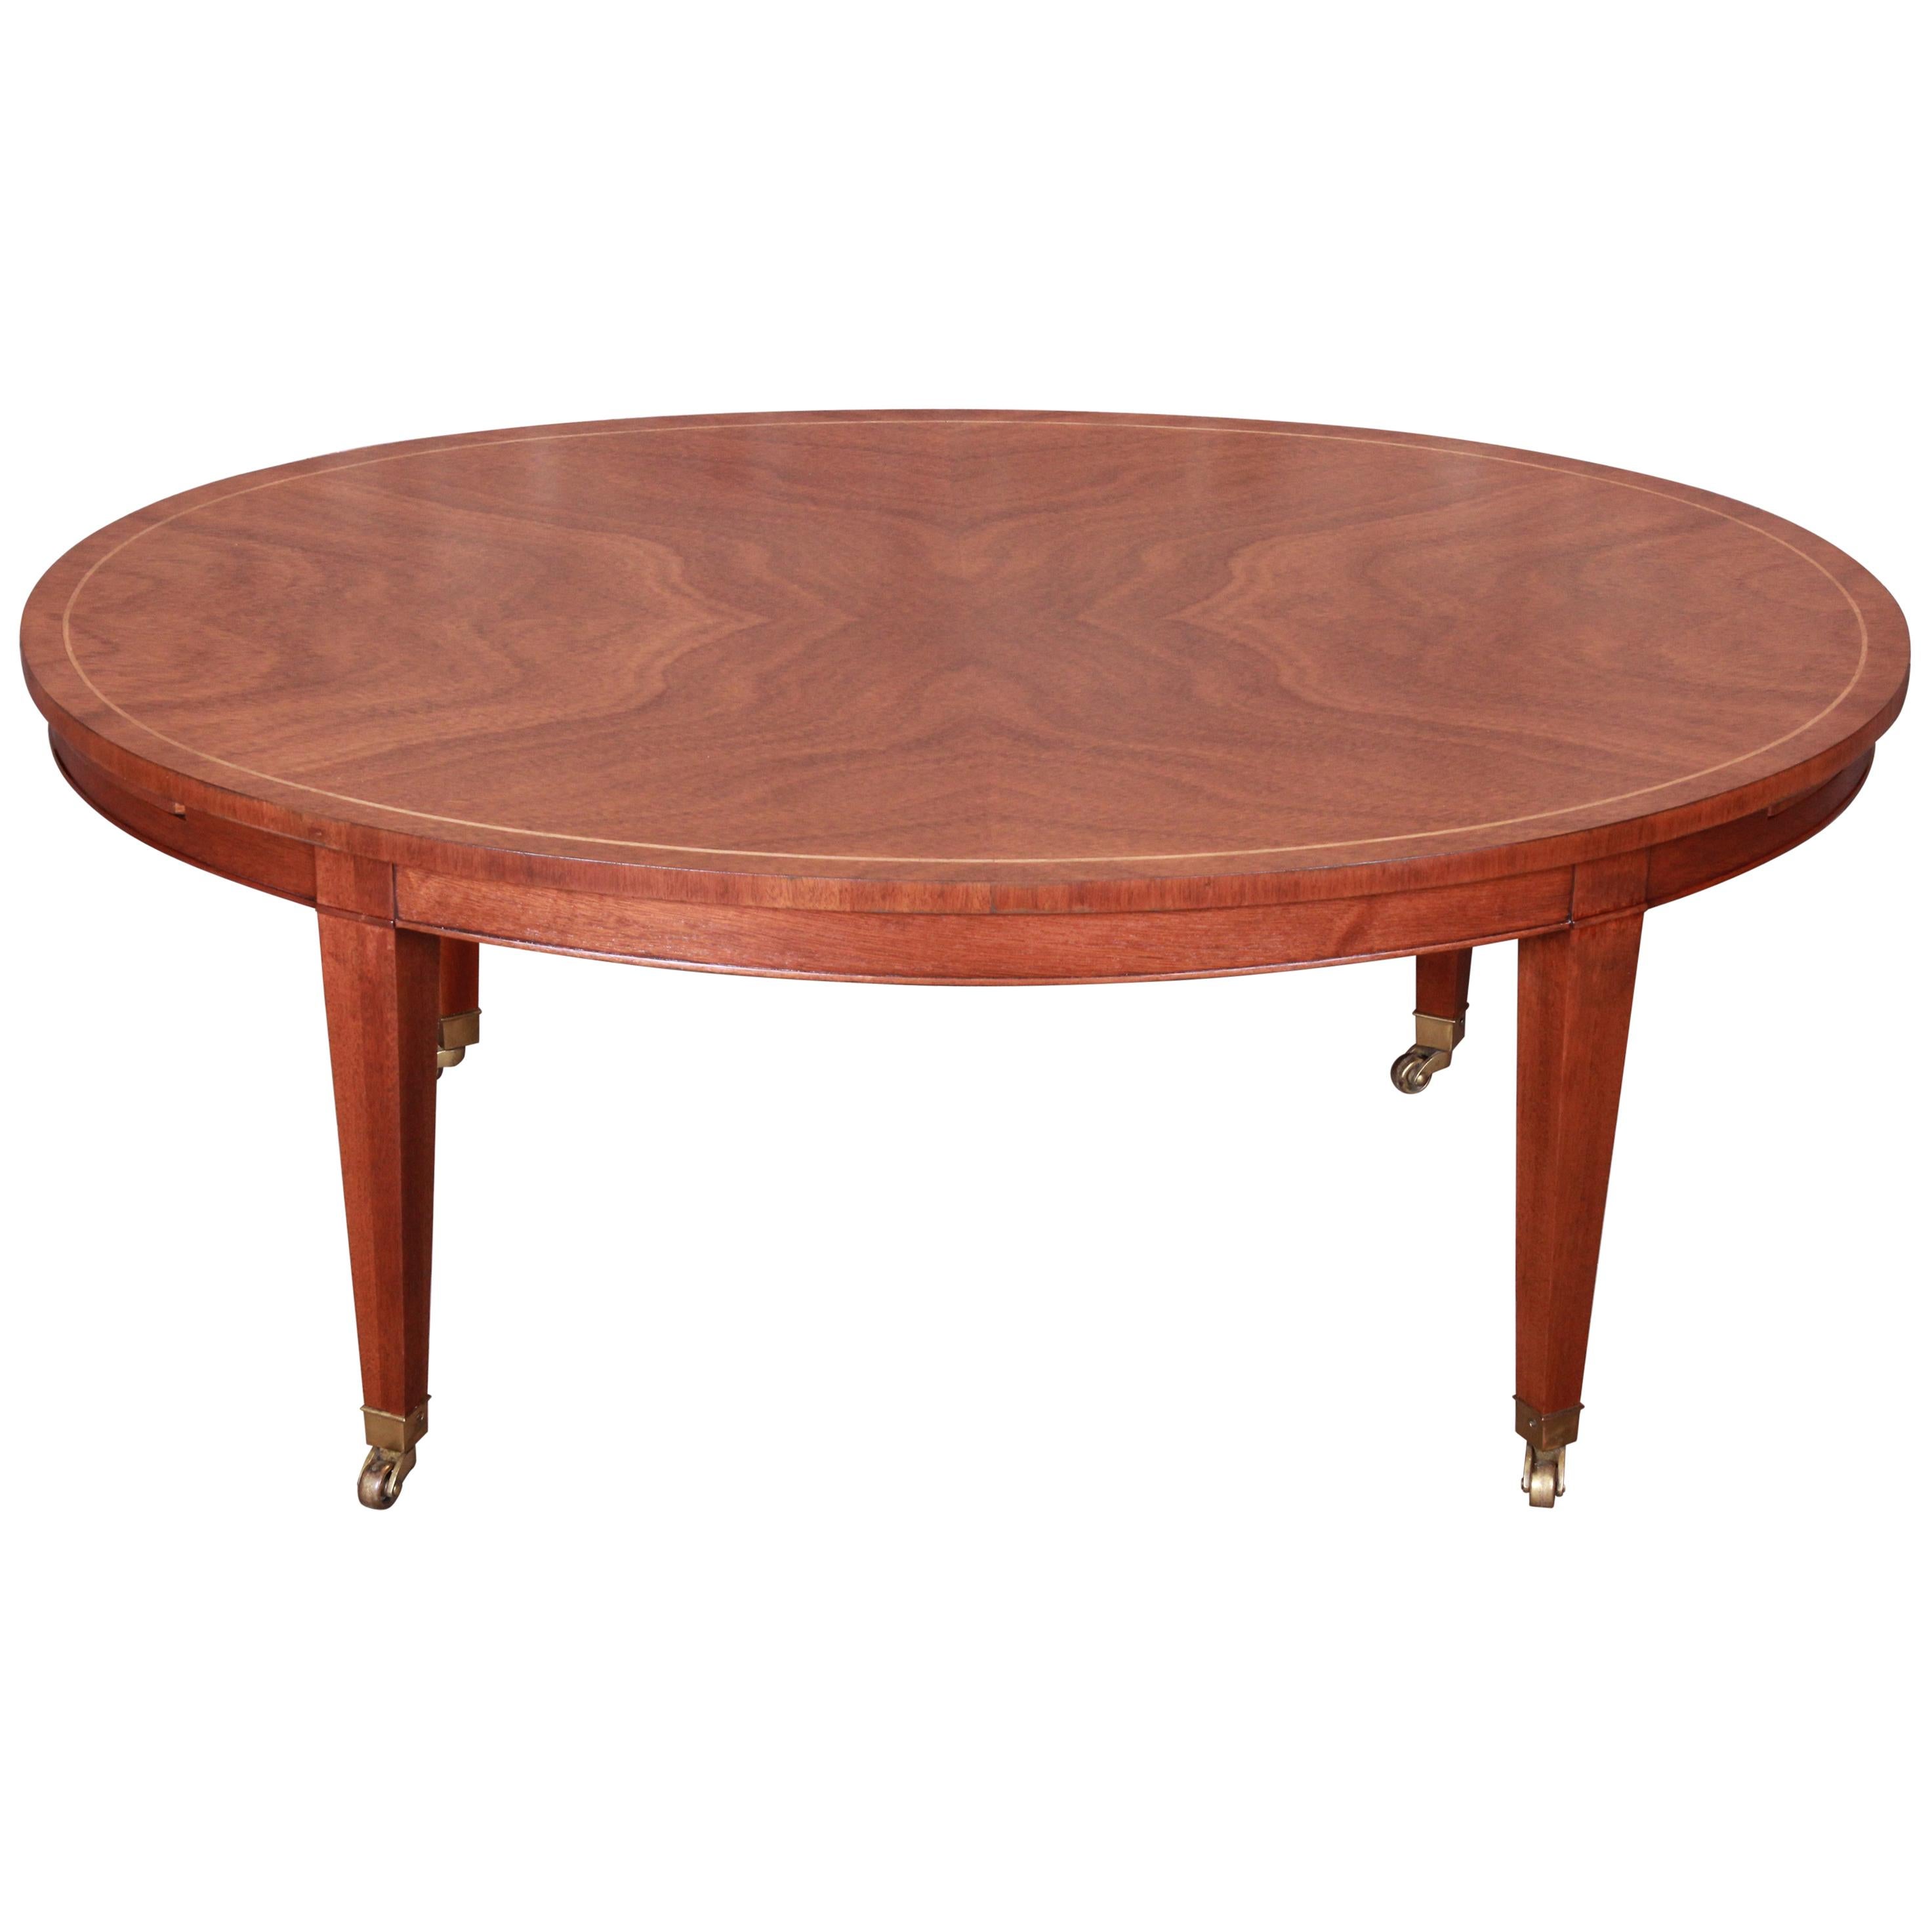 Baker Furniture Federal Mahogany Oval Coffee Table, Newly Refinished